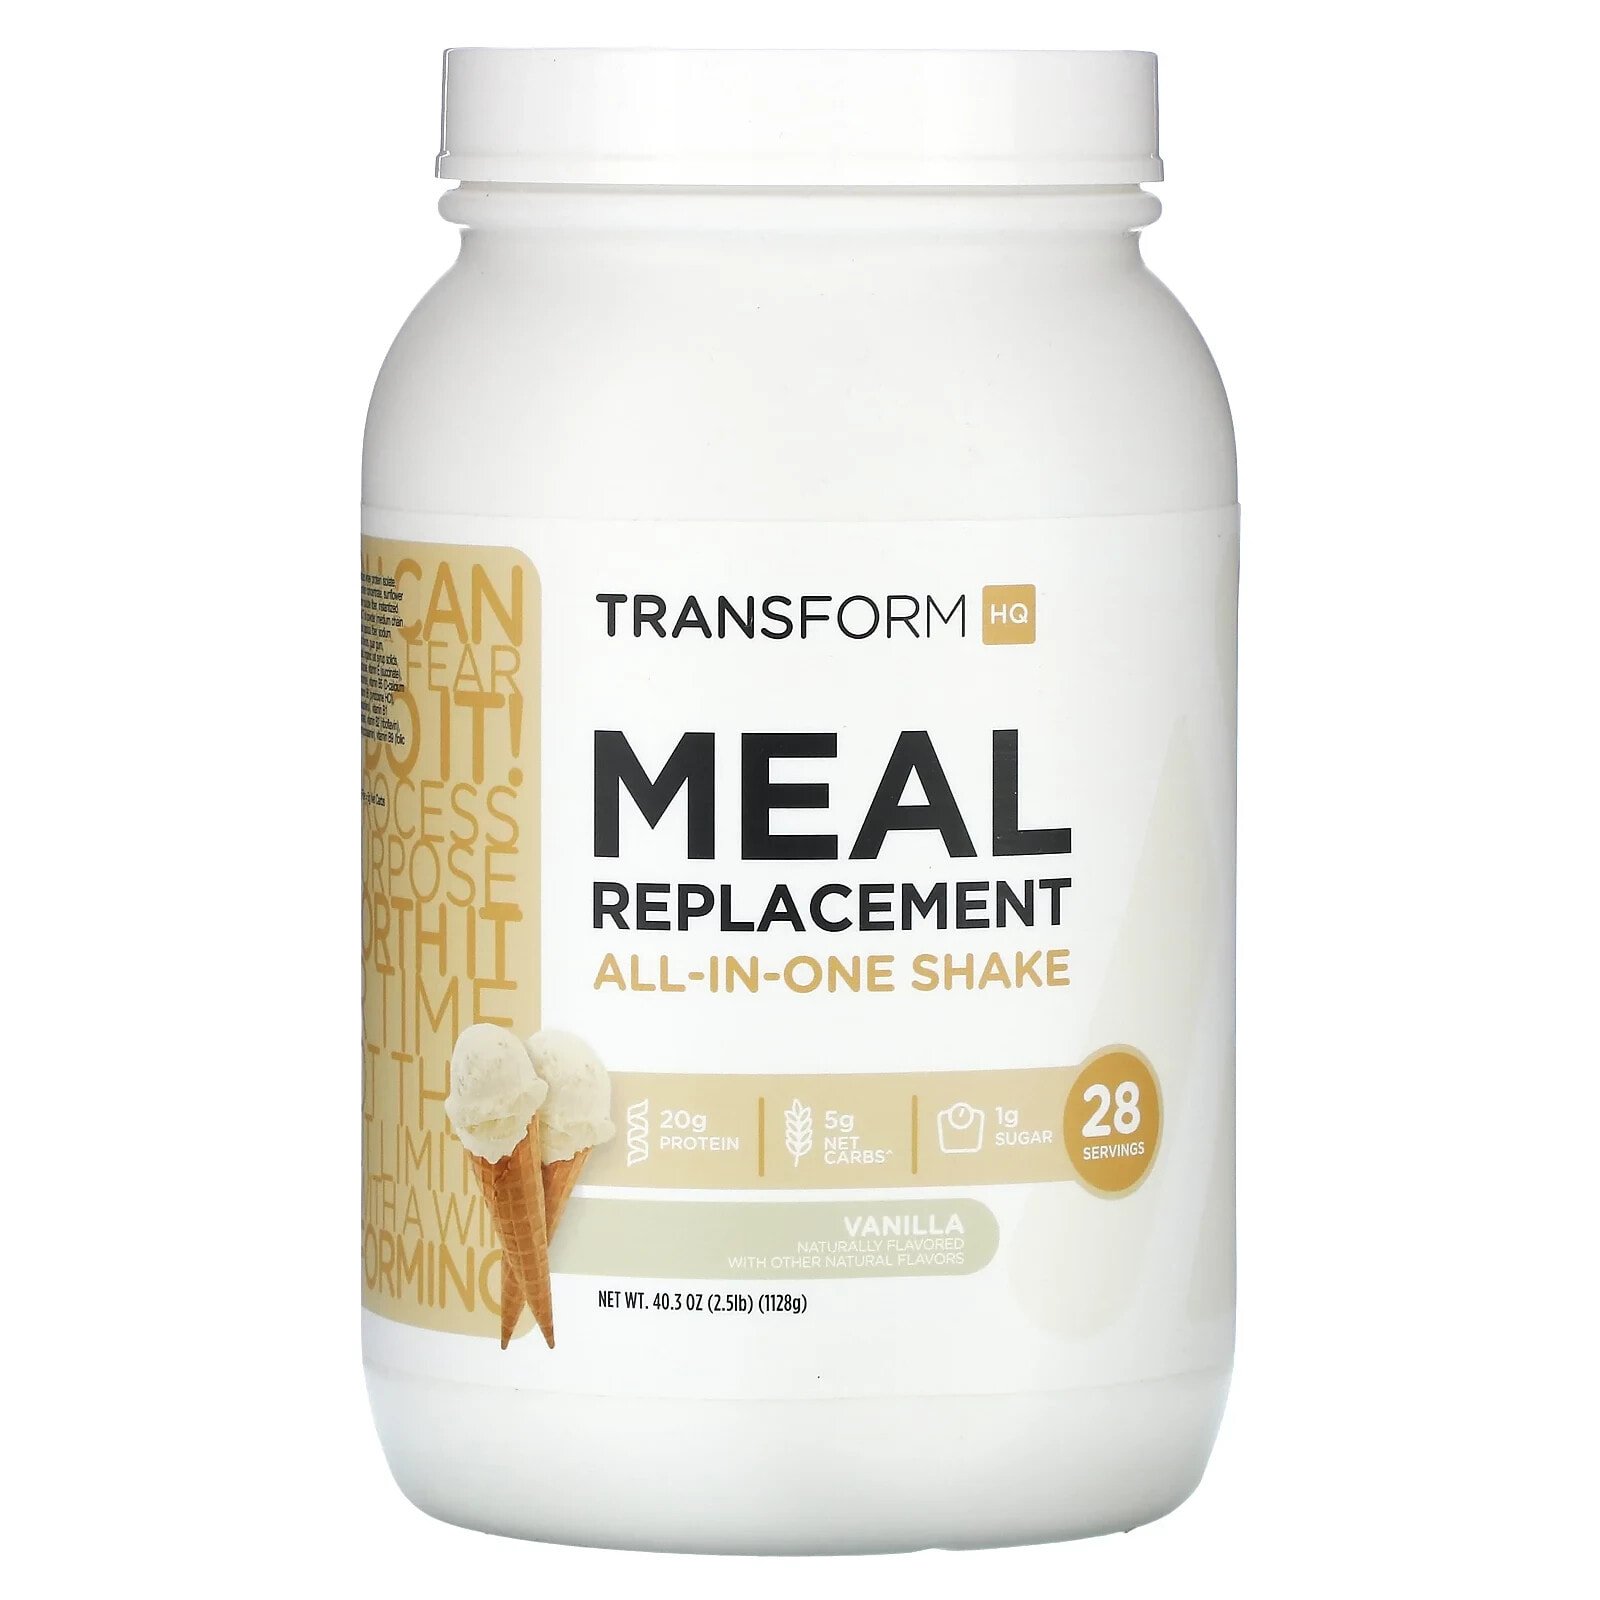 Meal Replacement, All-in-One Shake, Vanilla, 2.5 lb 40.3 (1128 g)